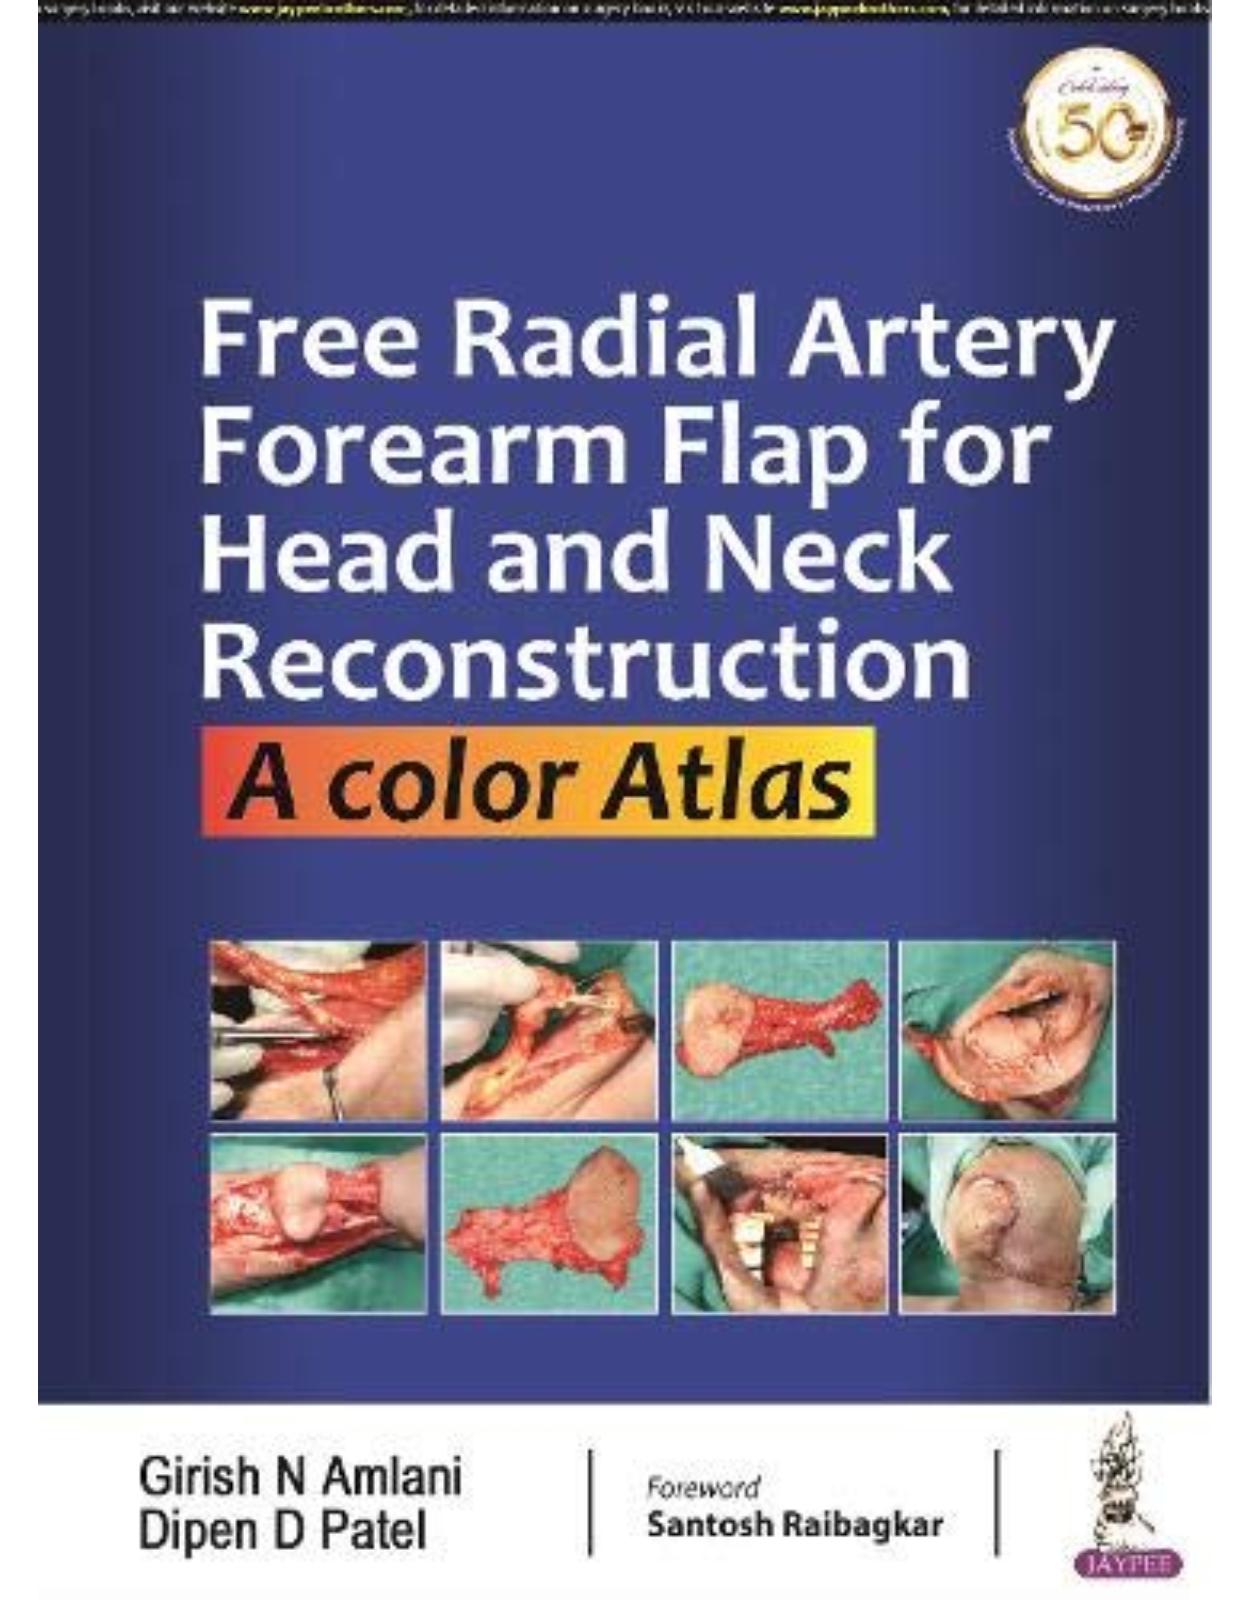 Free Radial Artery Forearm Flap for Head and Neck Reconstruction: A Color Atlas 